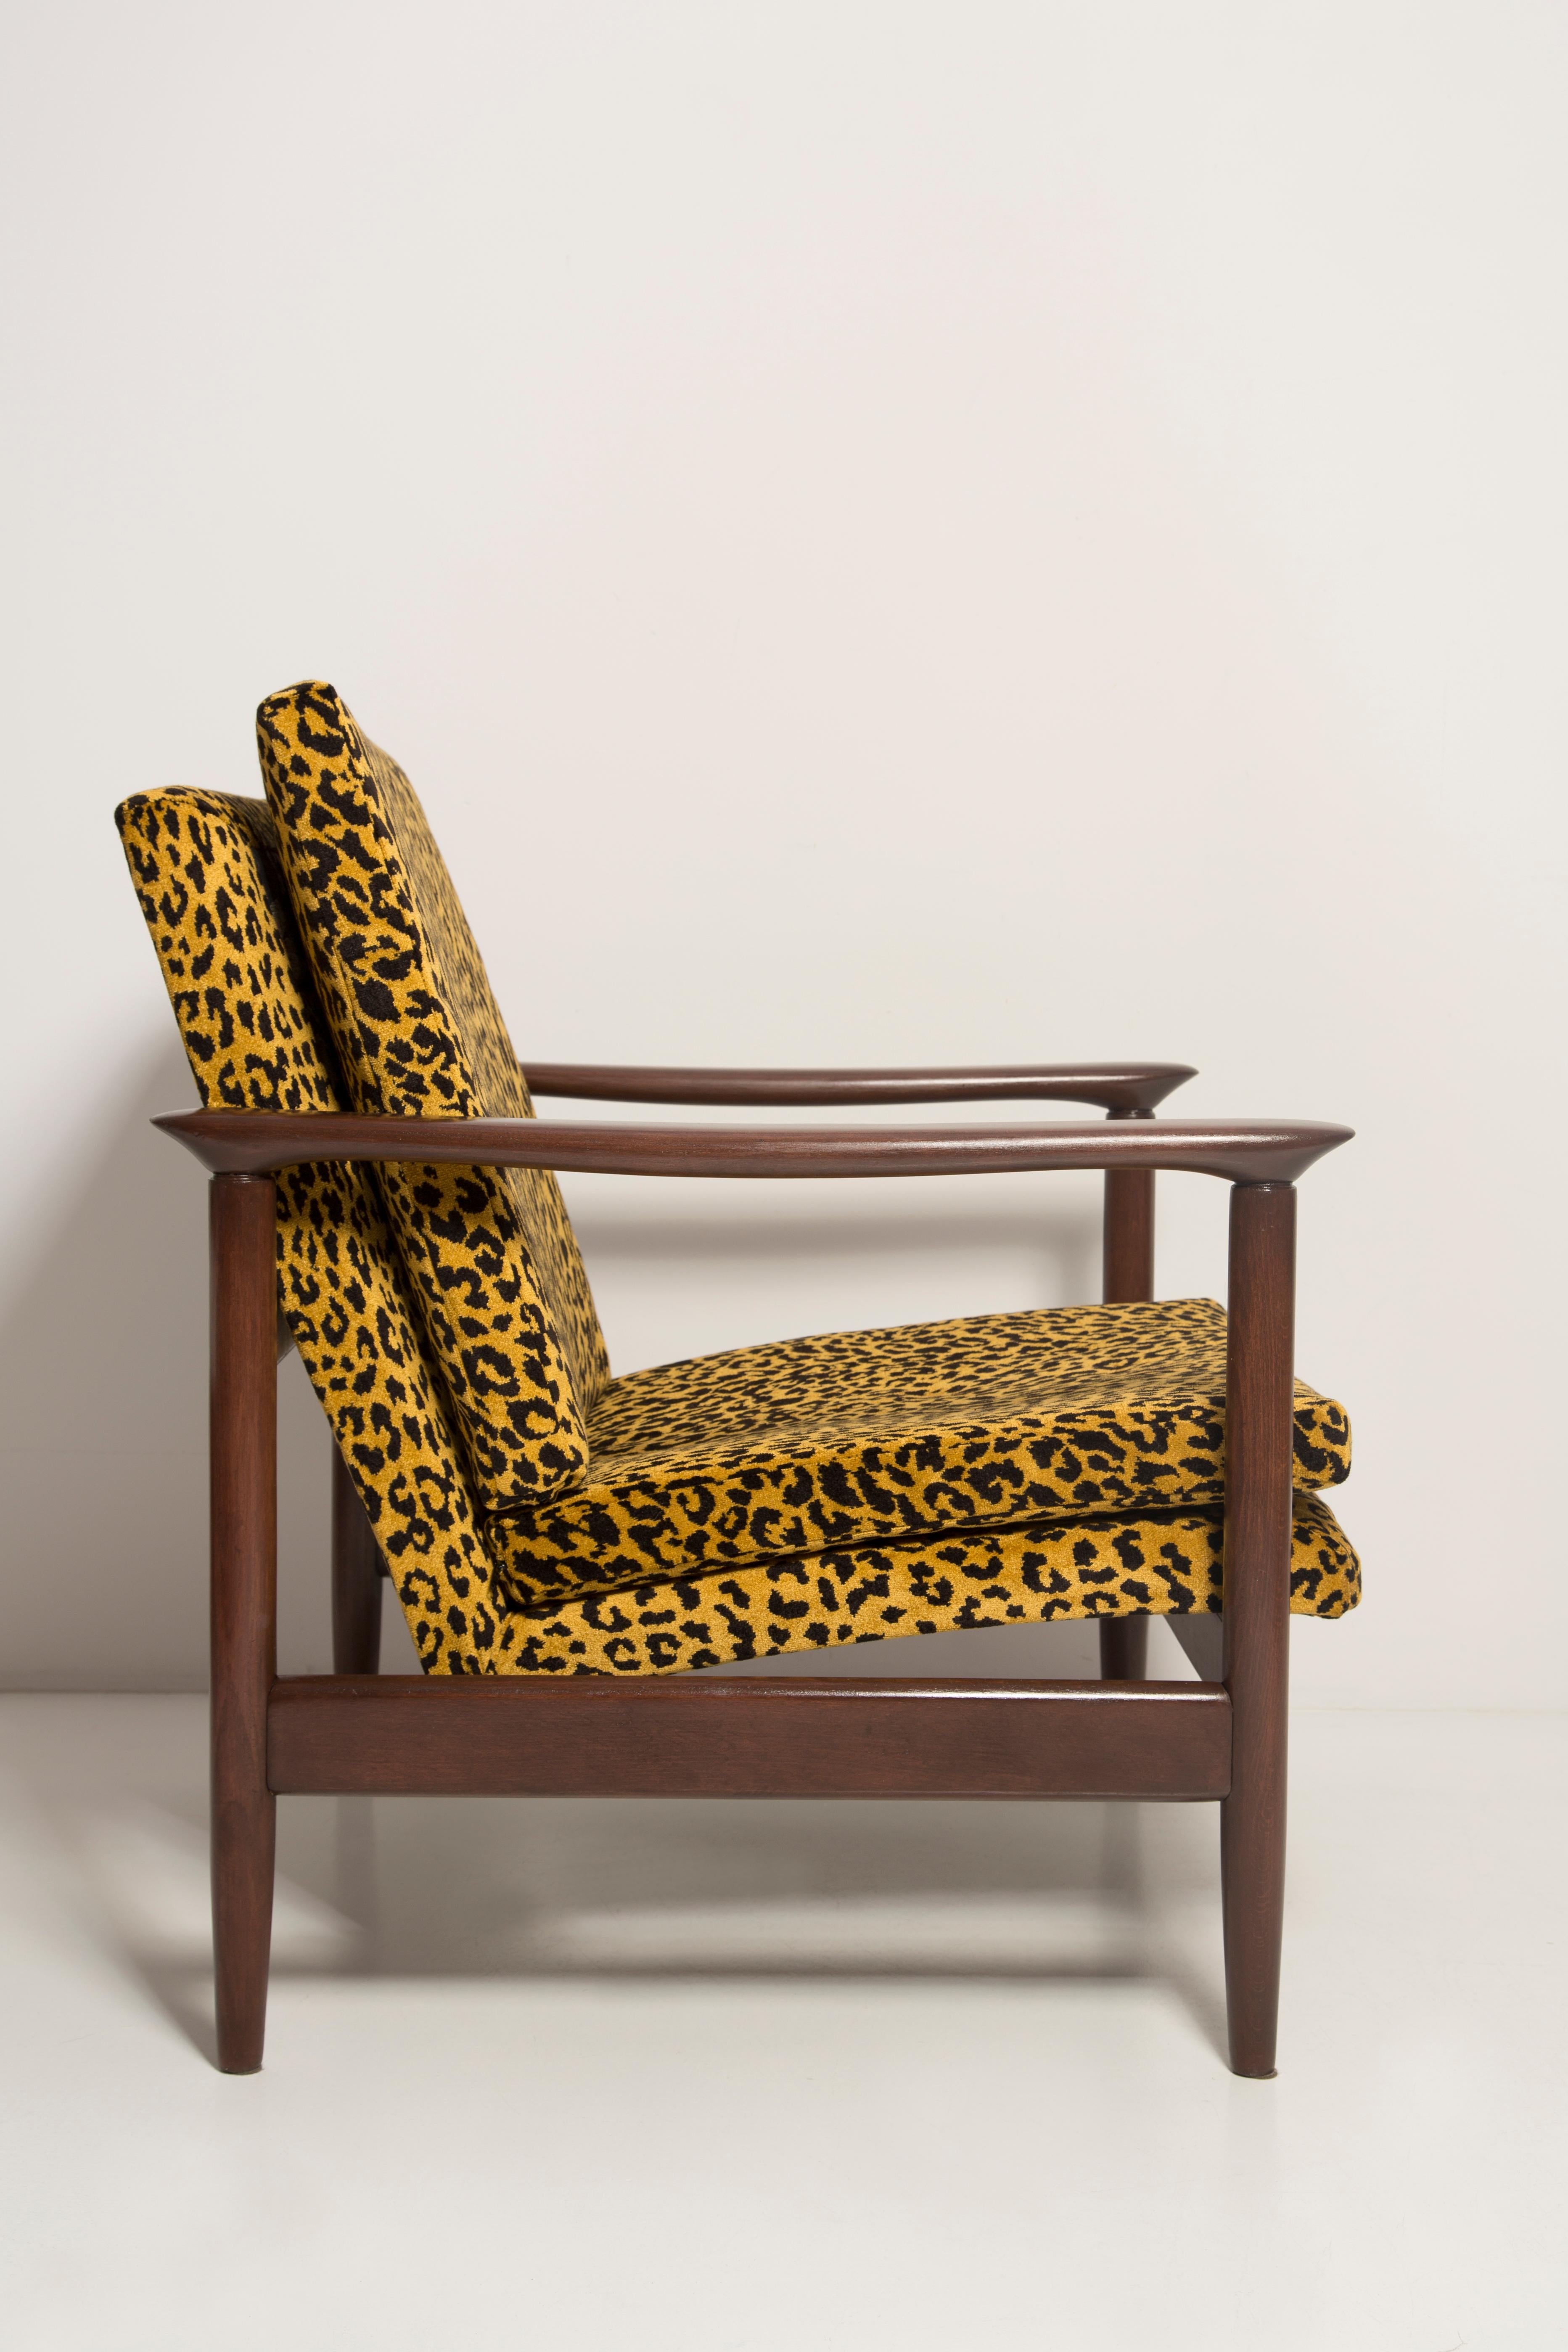 Pair of Midcentury Leopard Armchairs, GFM 142, Edmund Homa, Europe, 1960s For Sale 1